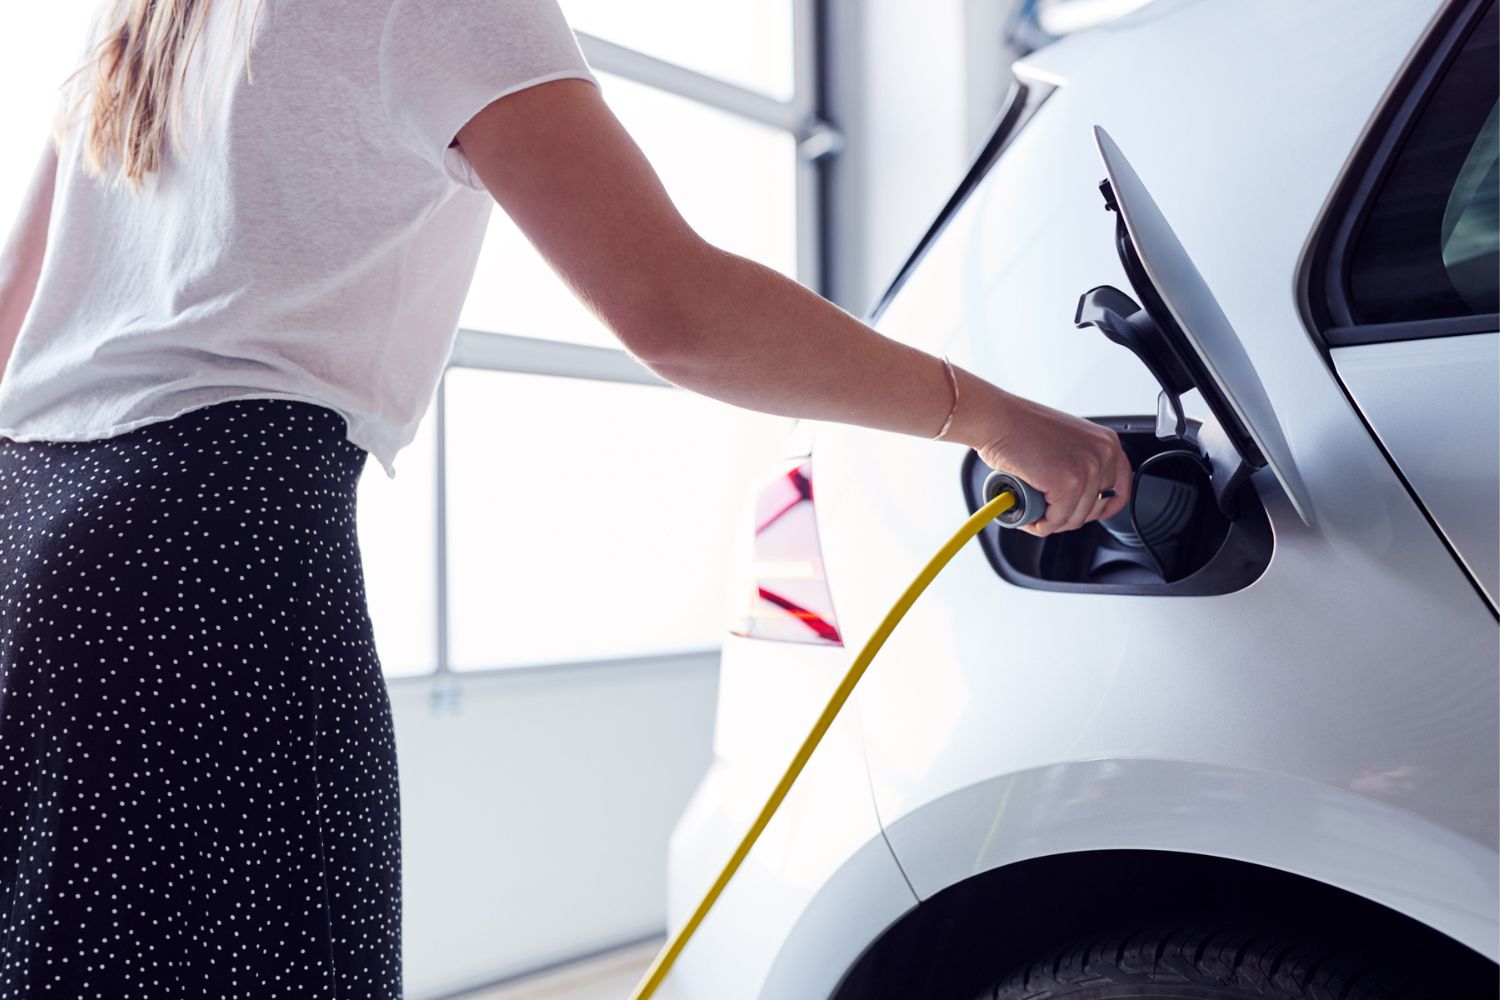 How Much Does It Cost to Install an EV Charger at Home